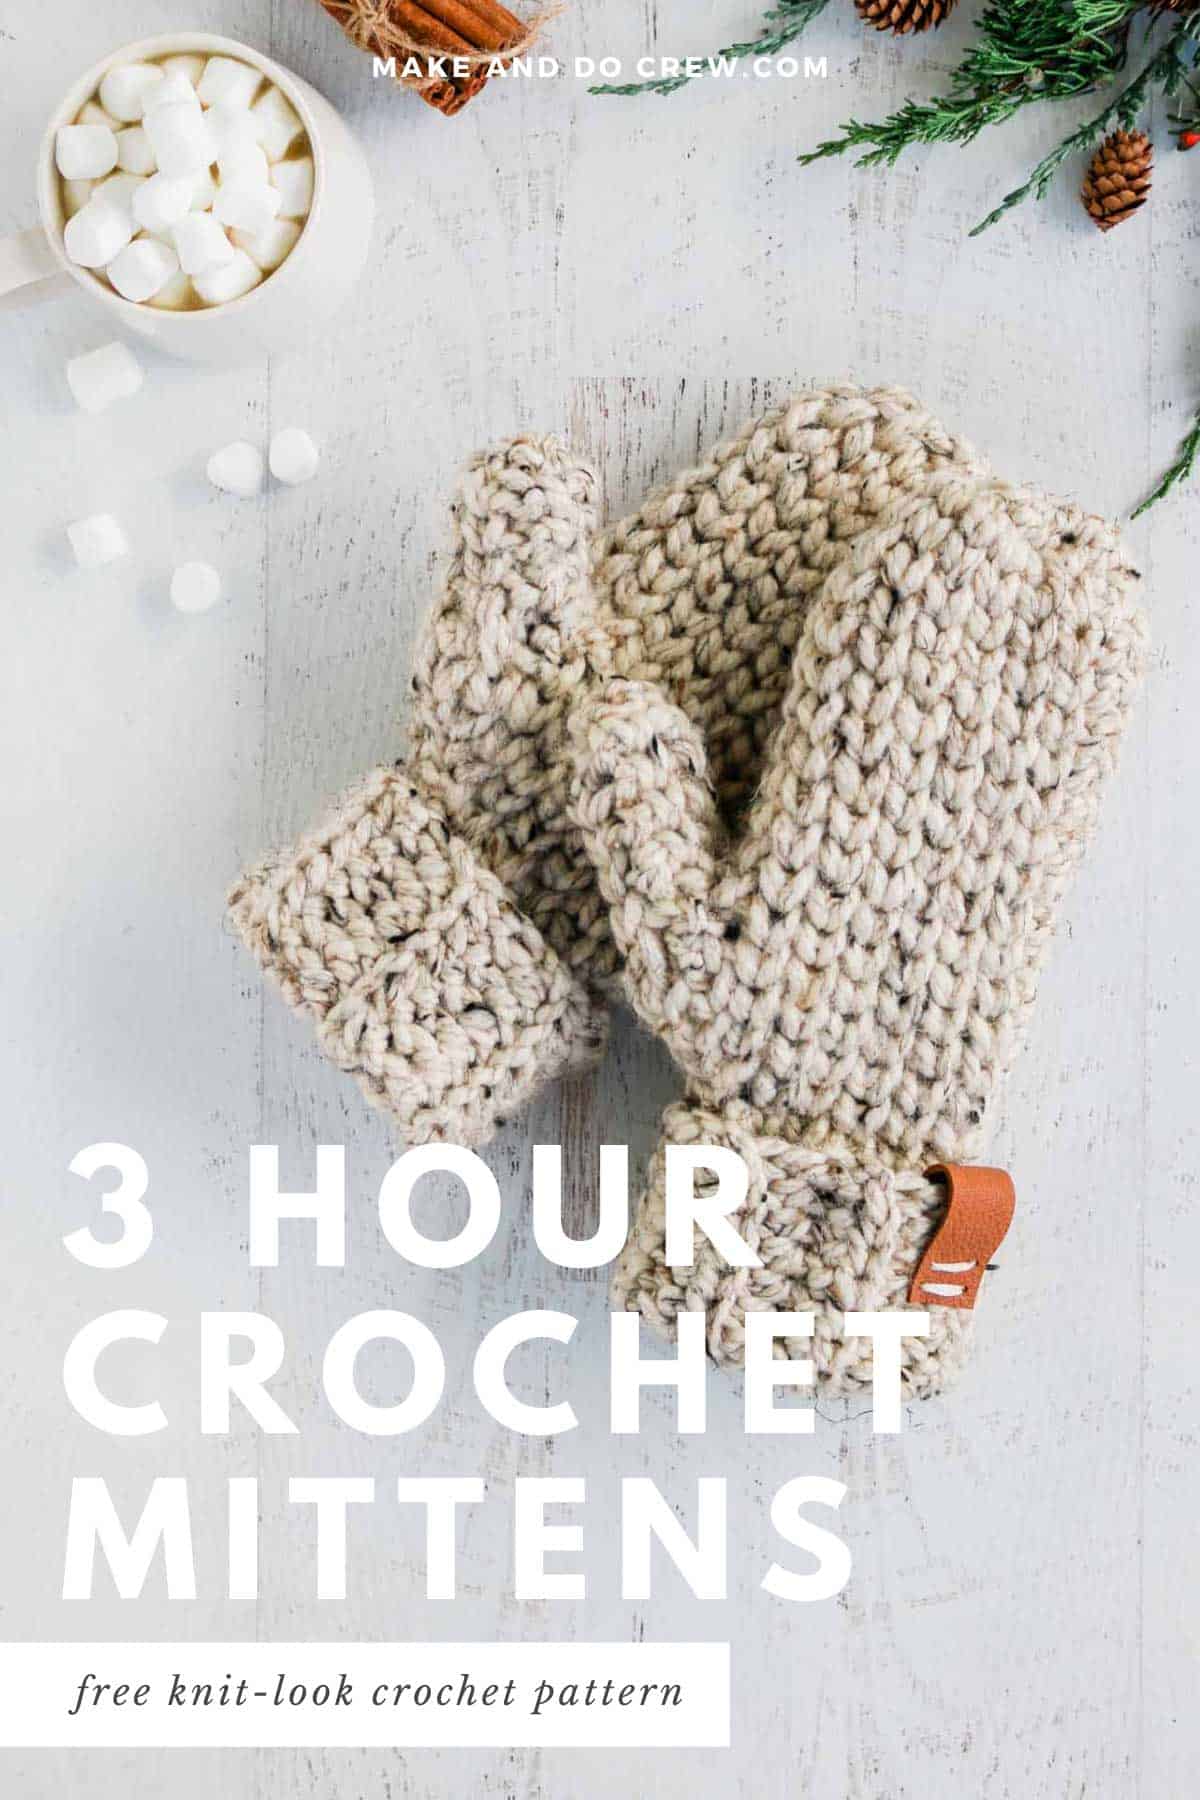 A chunky set of crochet mittens made with Wool Ease Thick & Quick and the waistcoat stitch. These crochet mittens look knit!